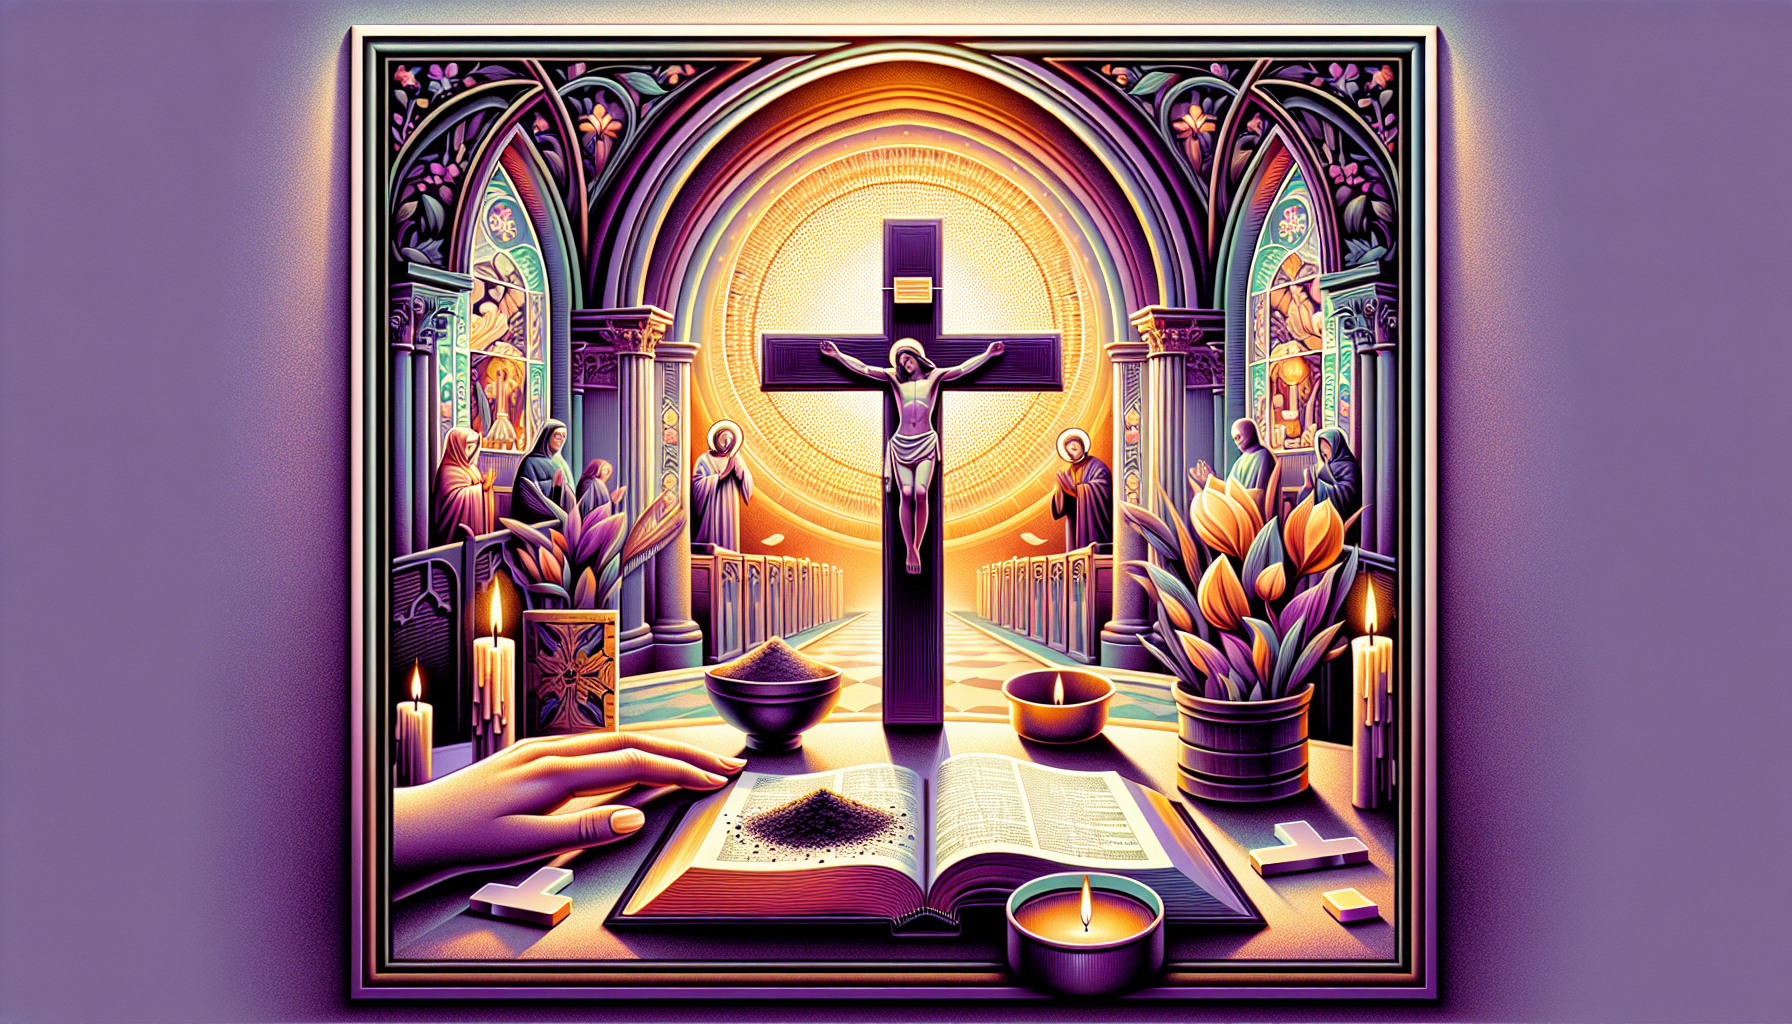 Create an image for an article titled Todo lo que necesitas saber sobre la Cuaresma. The image should feature a solemn and reflective scene with a central cross, traditional Christian symbols such as